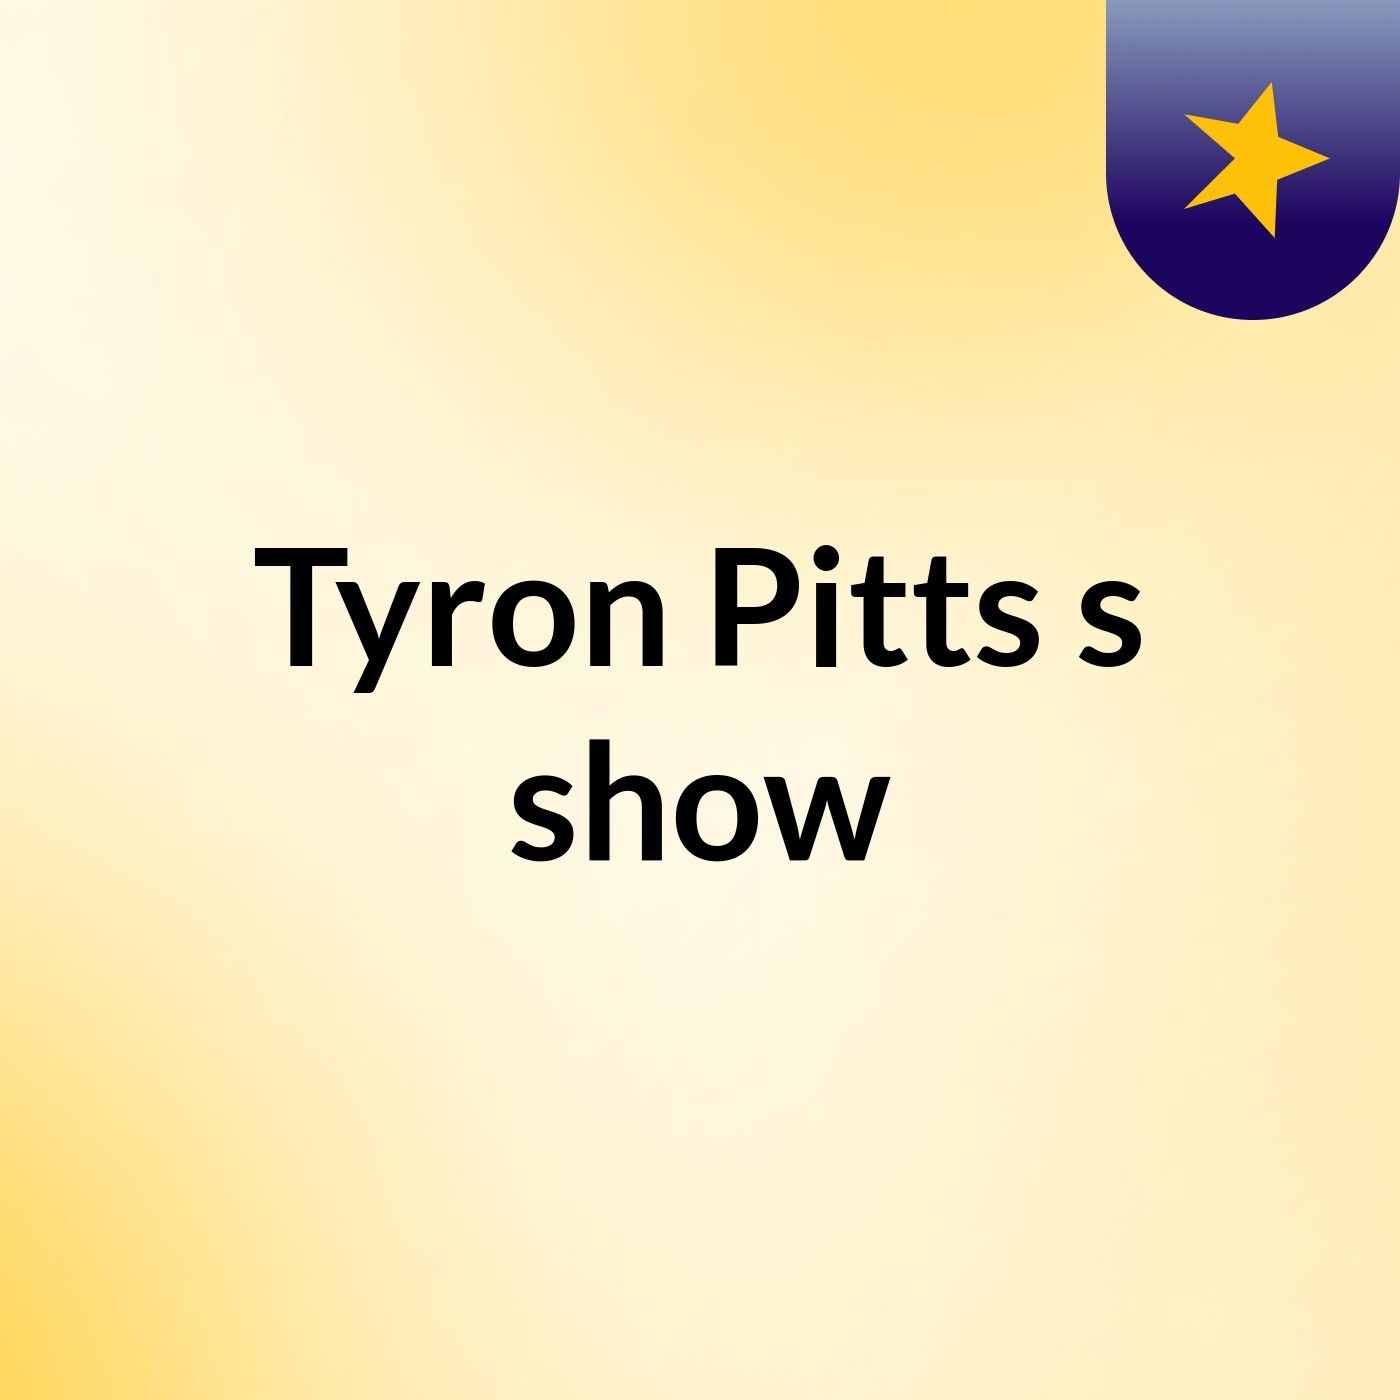 Tyron Pitts's show